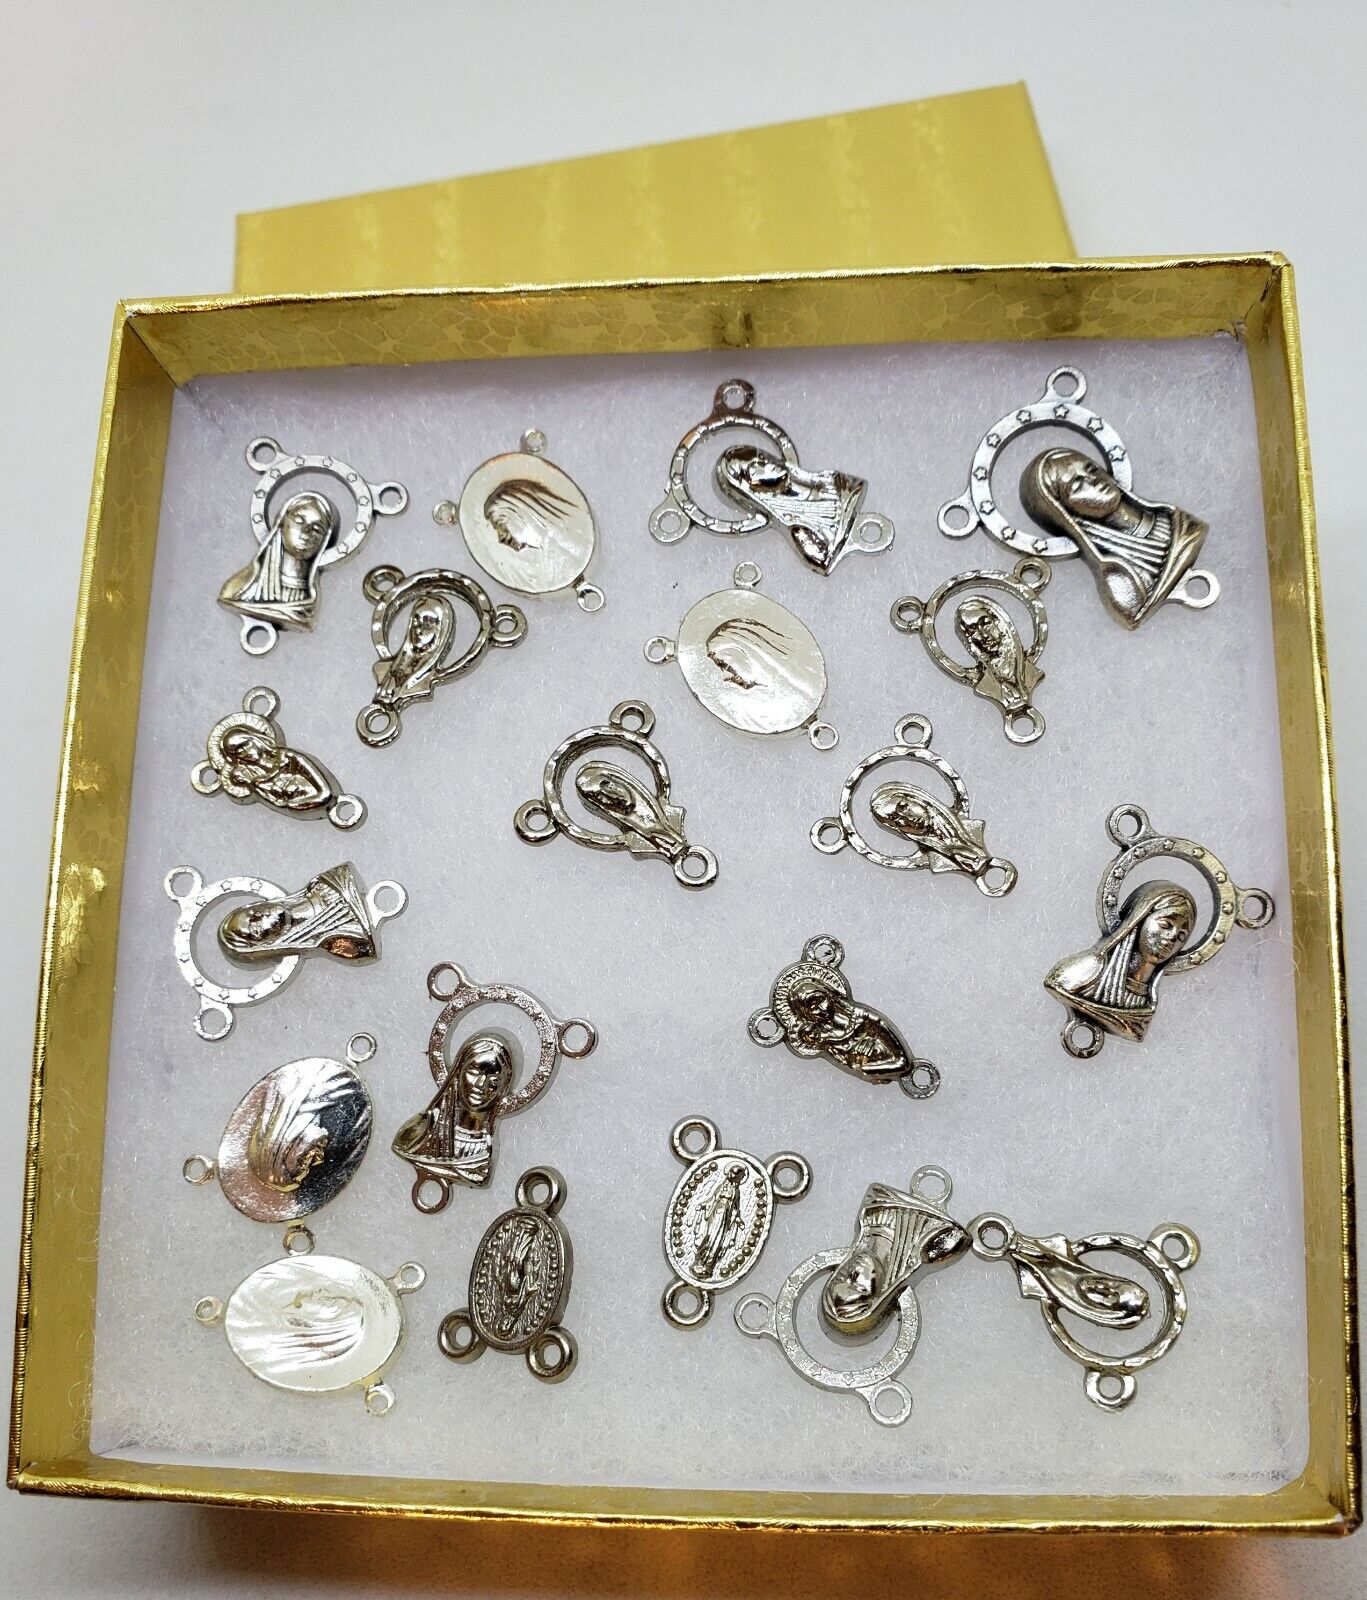 Small Rosary Centerpieces Mixed Lot of 20 Pewter SP Medallions from Chapel Italy Без бренда